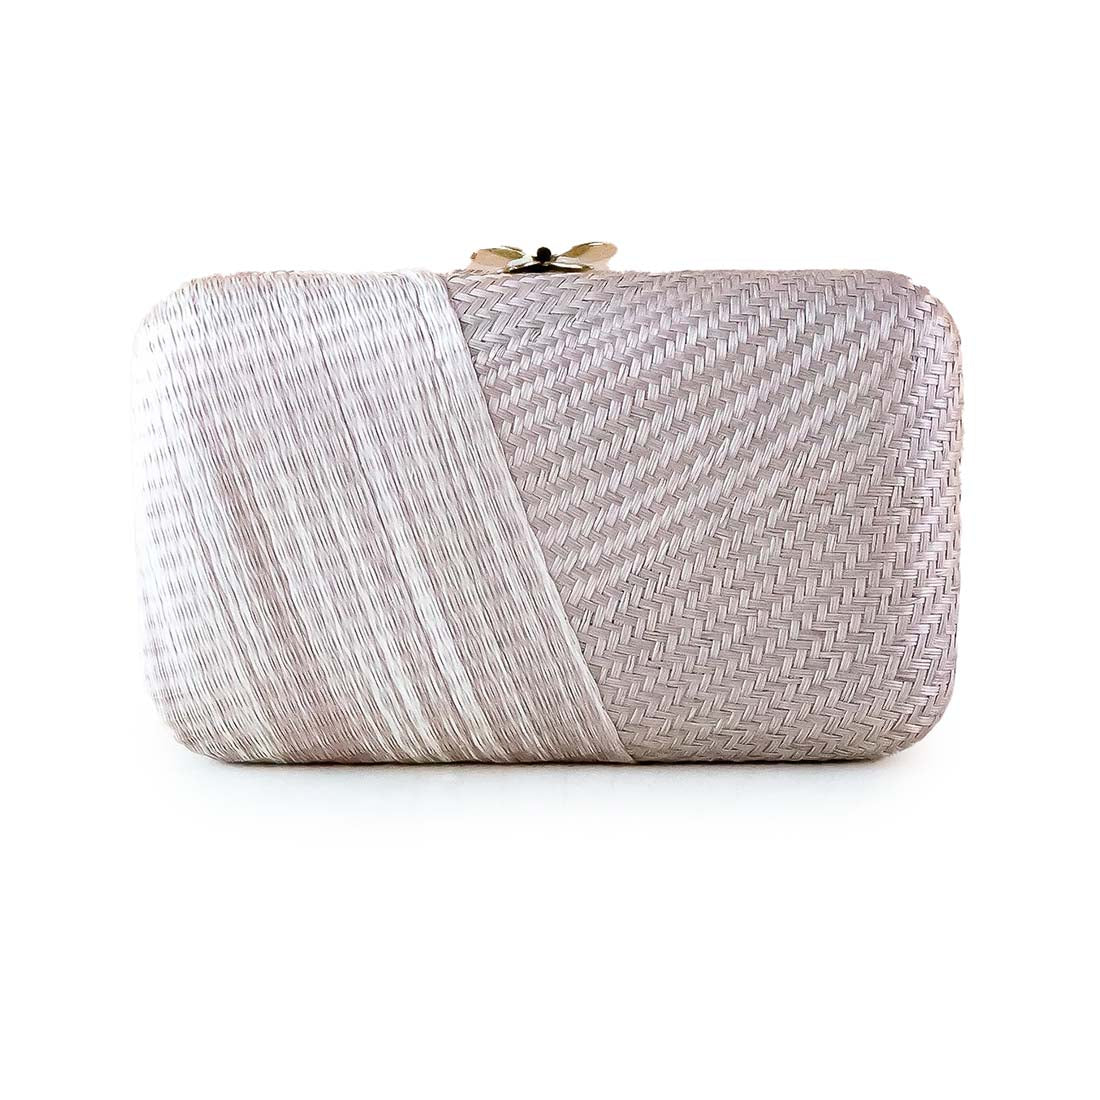 CLEAR CLUTCH IN DUSTY PINK - Armadillo